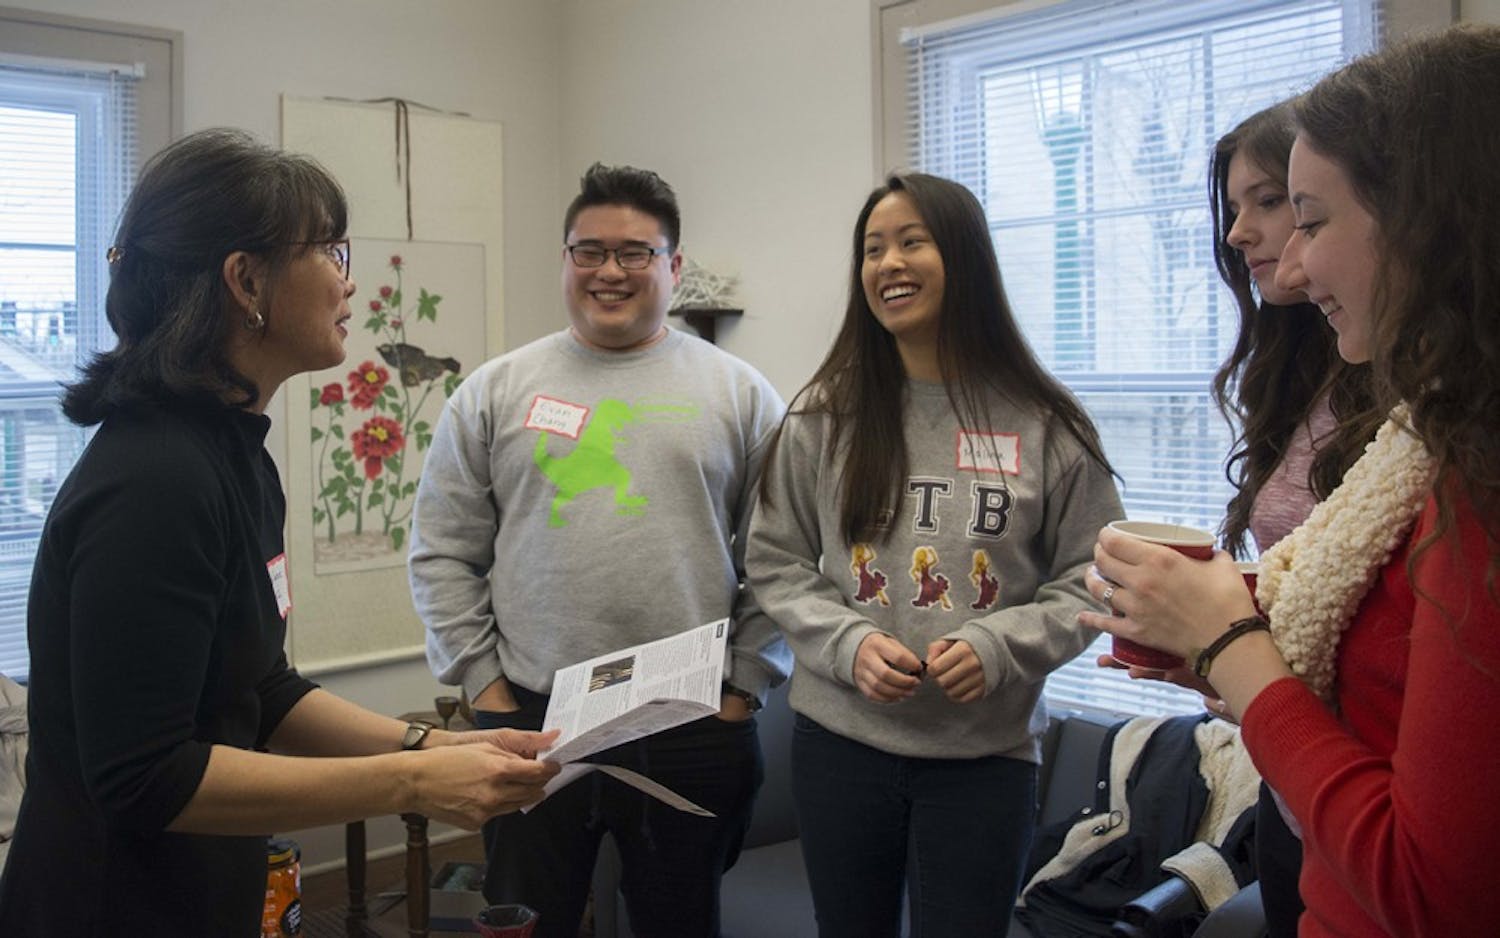 Melanie Castill0-Cullather, director of Indiana University Asian Culture Center, talks to students before the workshop on how to honor and keep new year's resolutons at Asian Culture Center, Jan 13. 